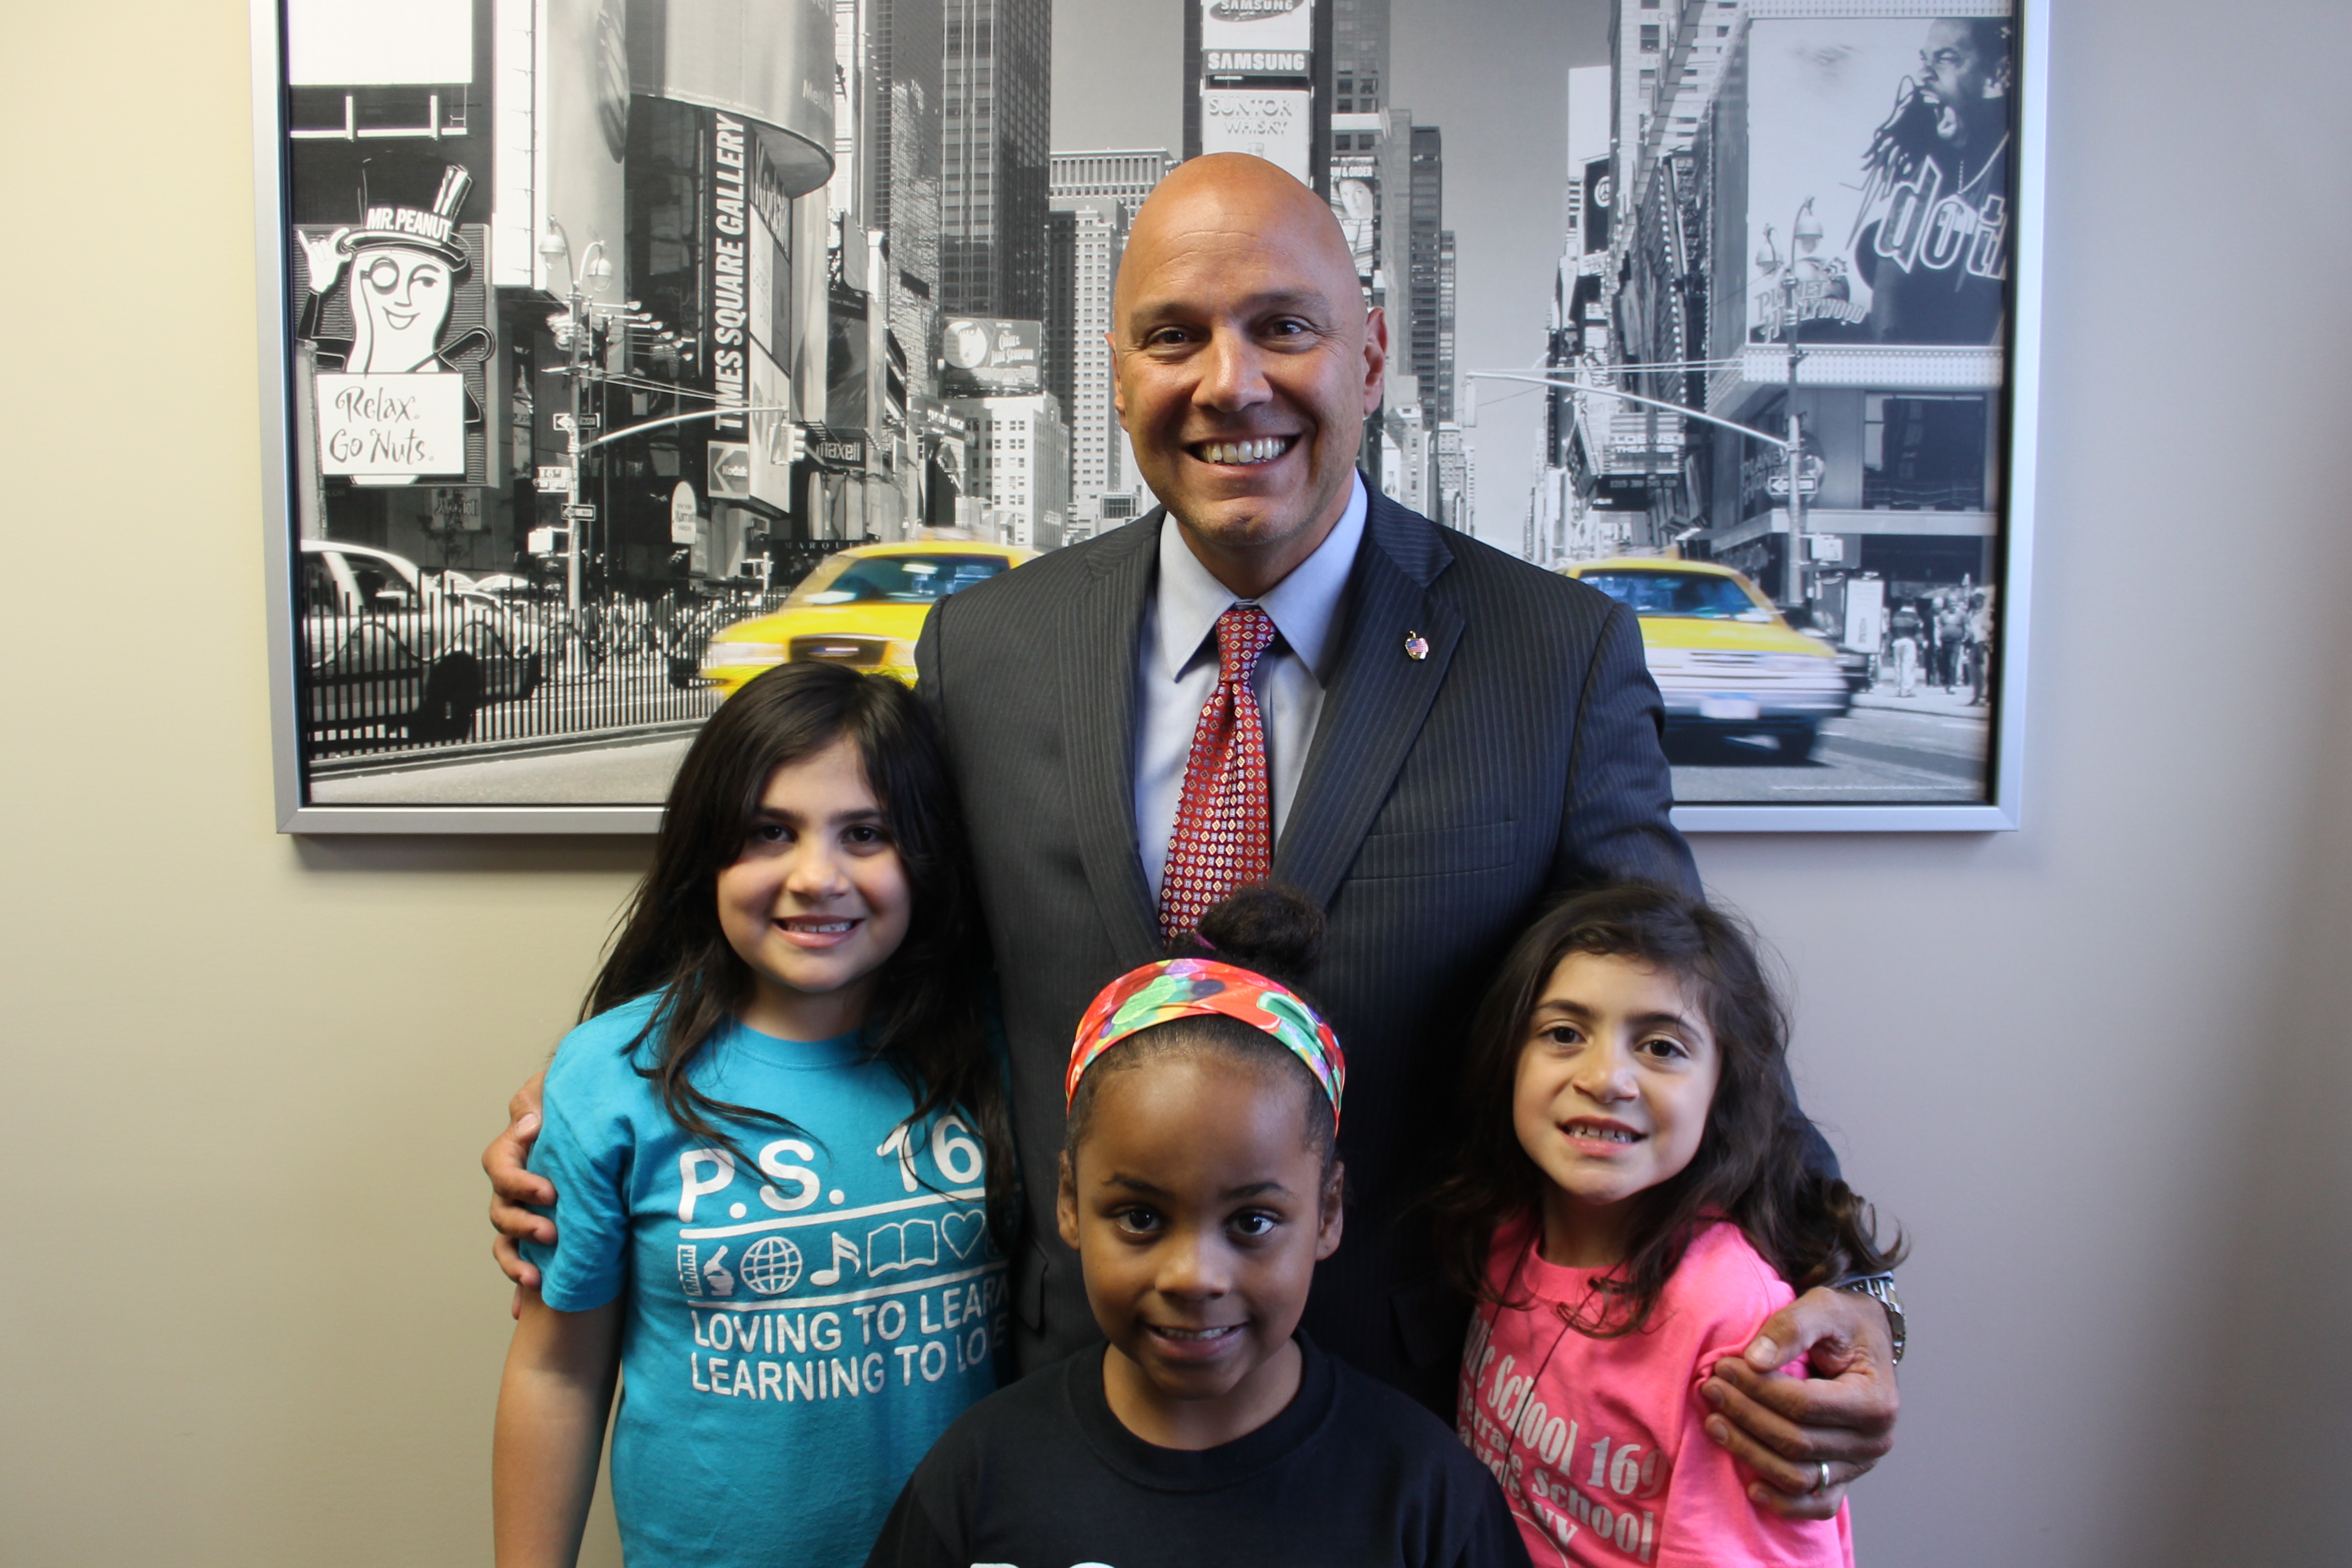 Councilman Vallone and kids